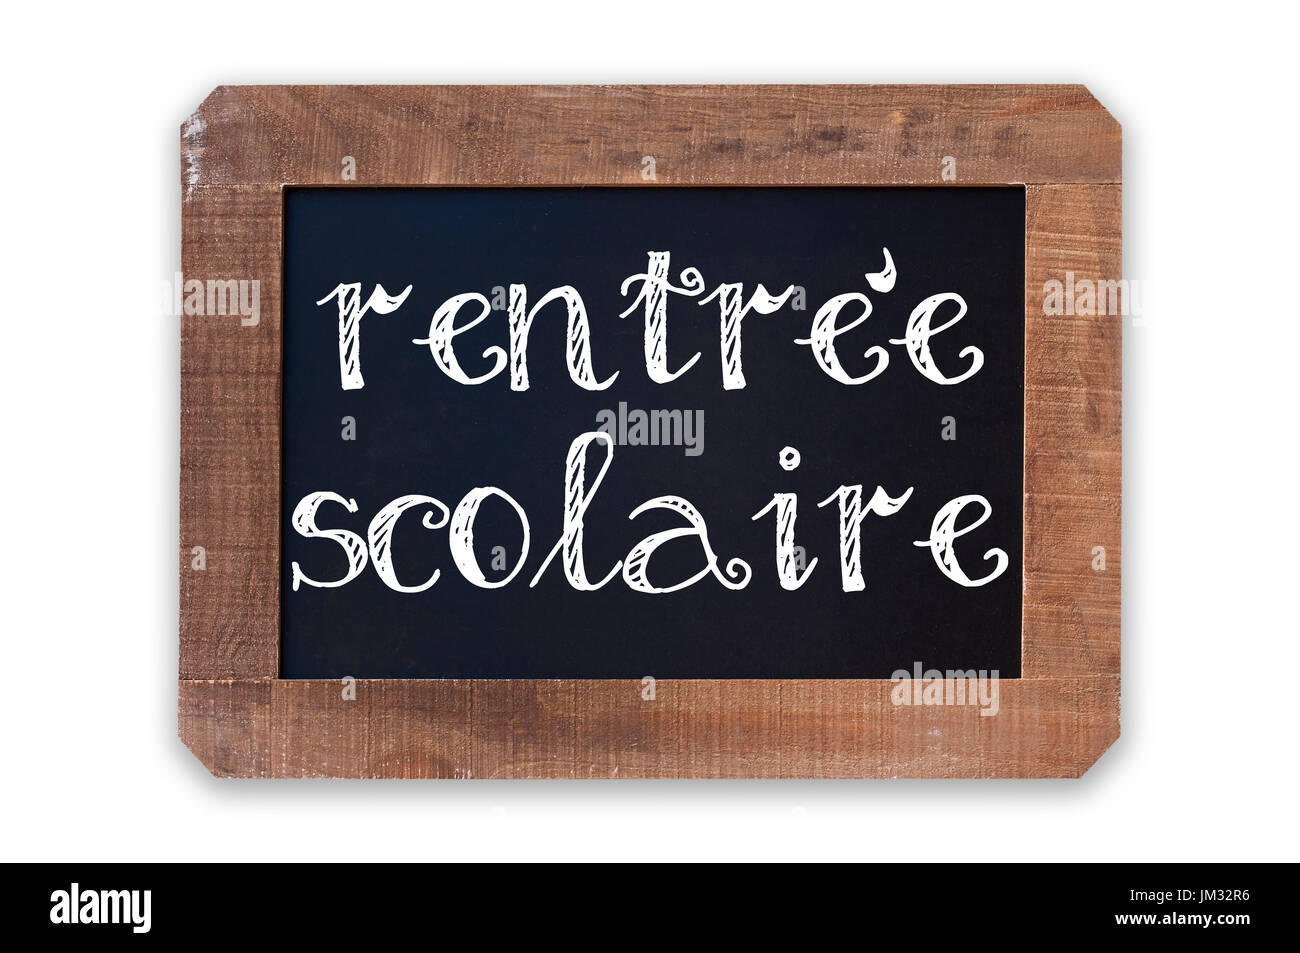 Rentree scolaire (meaning Back to school) written on a vintage blackboard with wooden frame isolated on white background Stock Photo